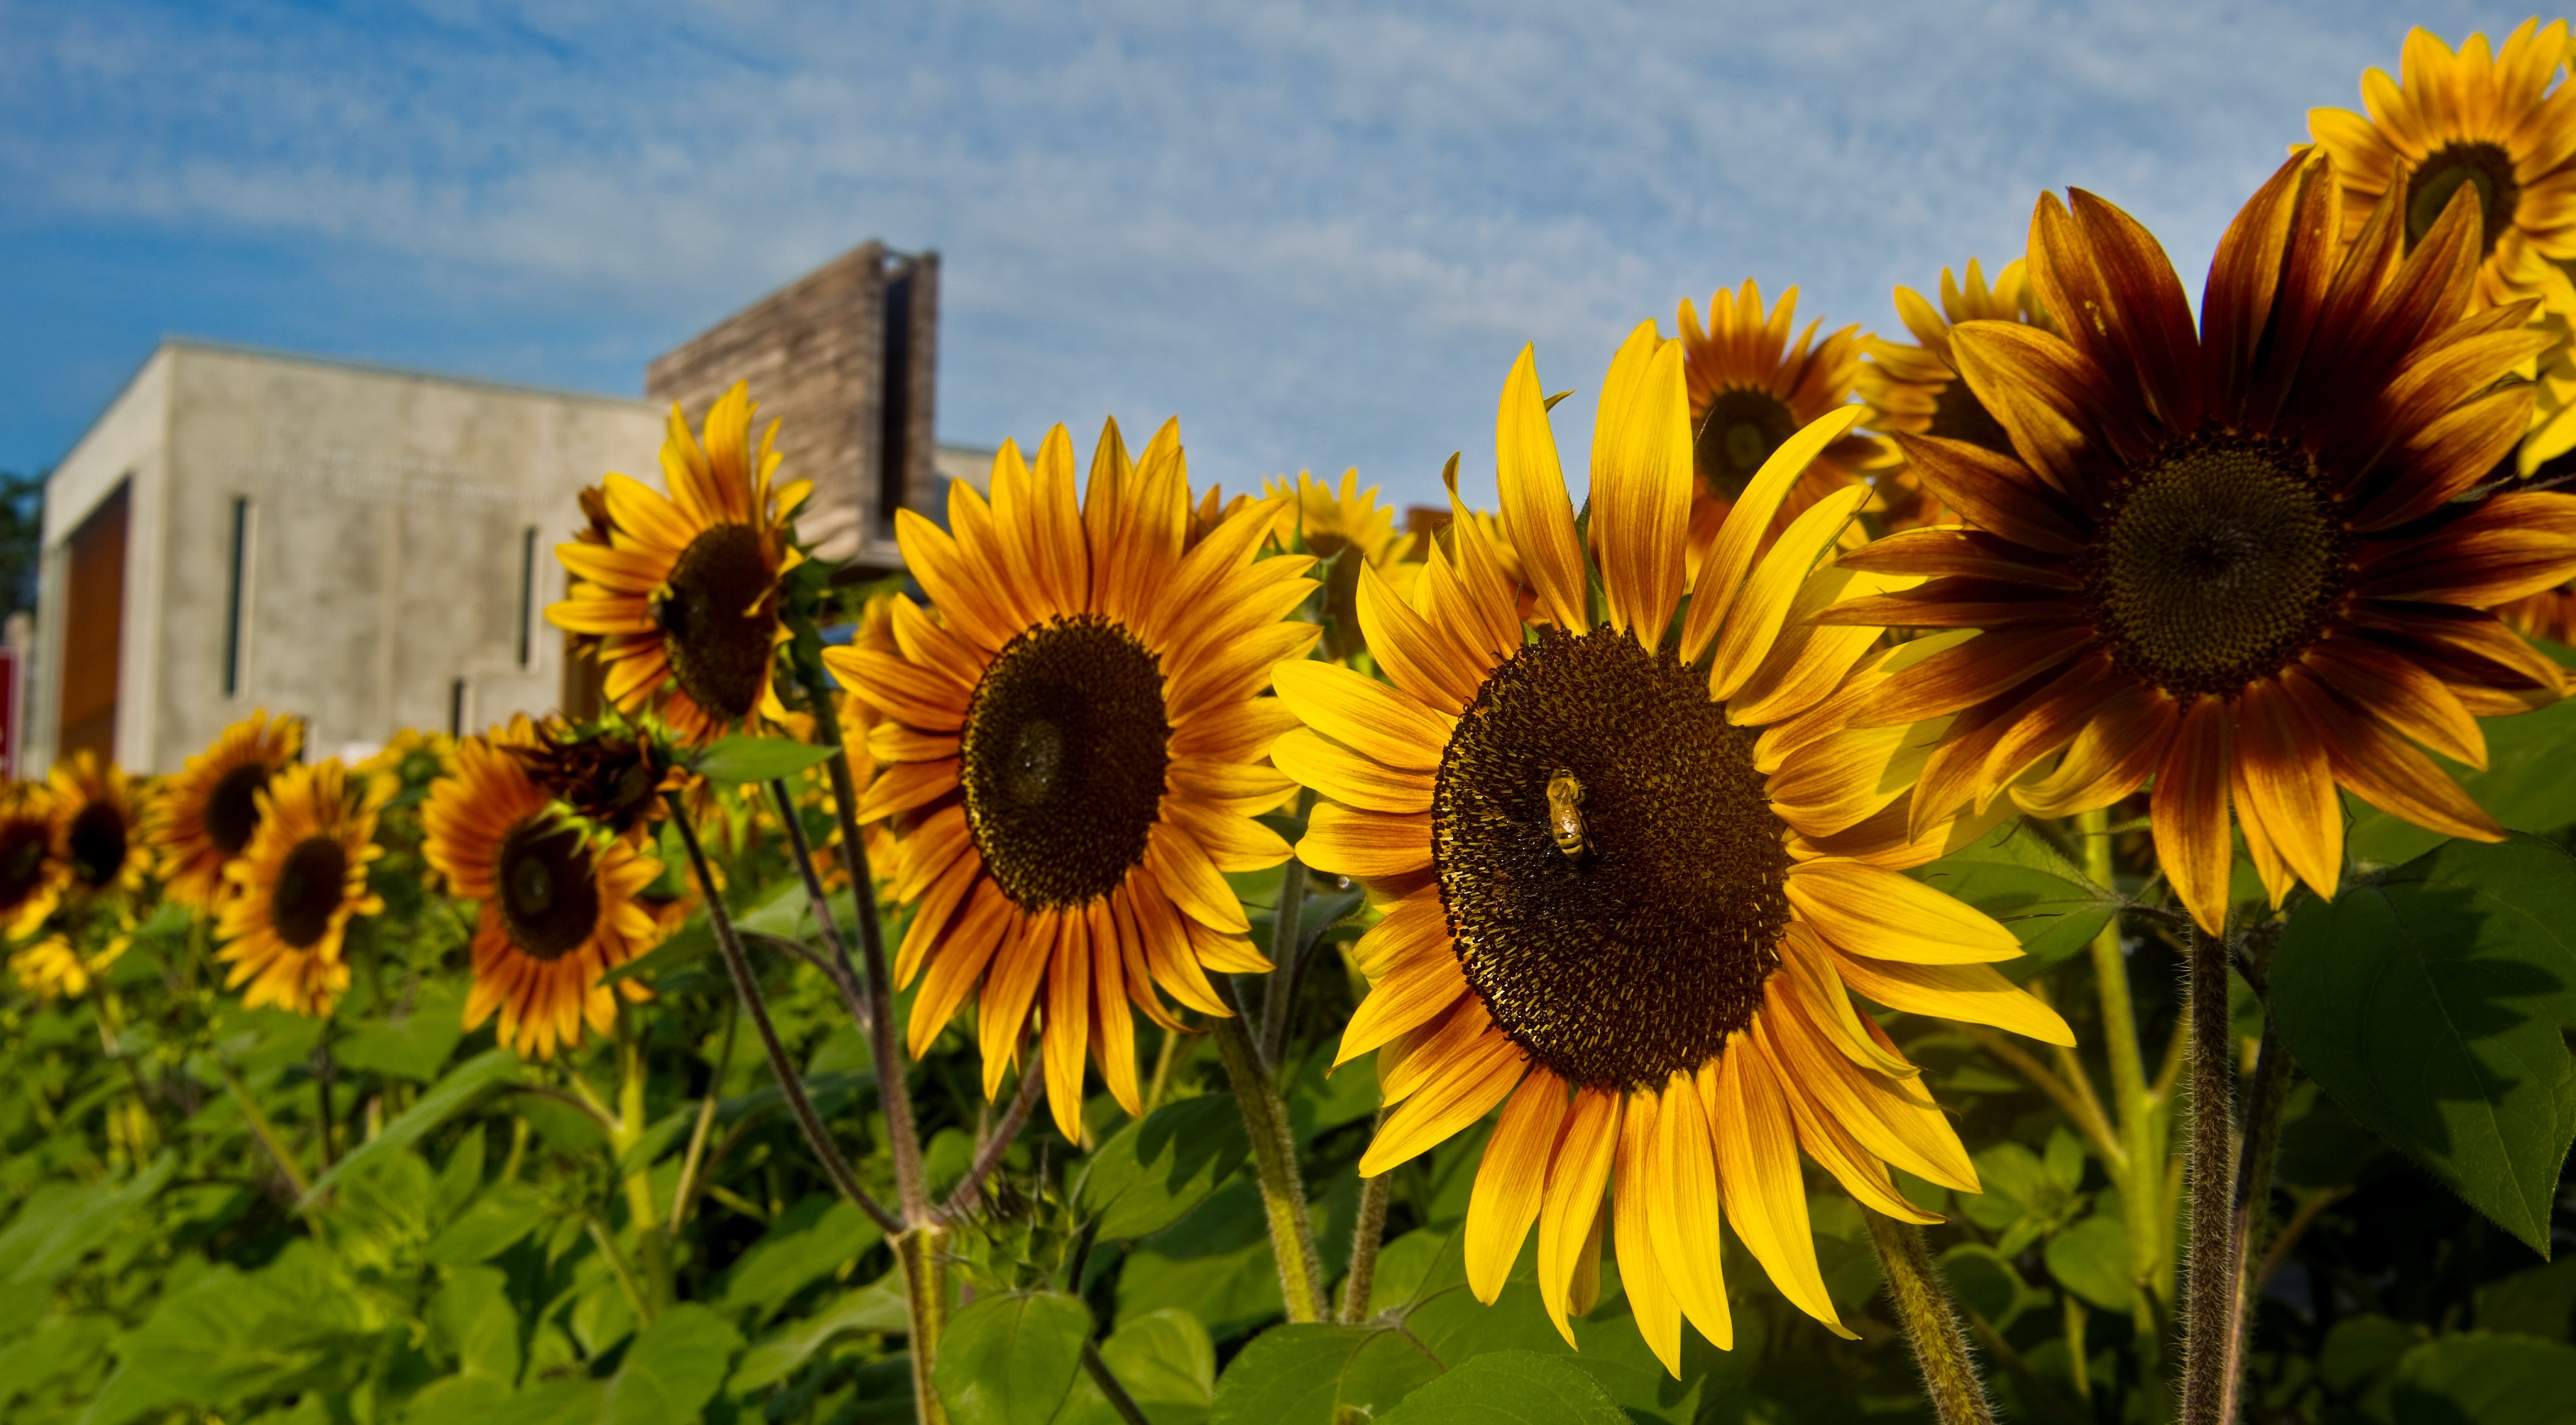 Sunflowers blooming on campus